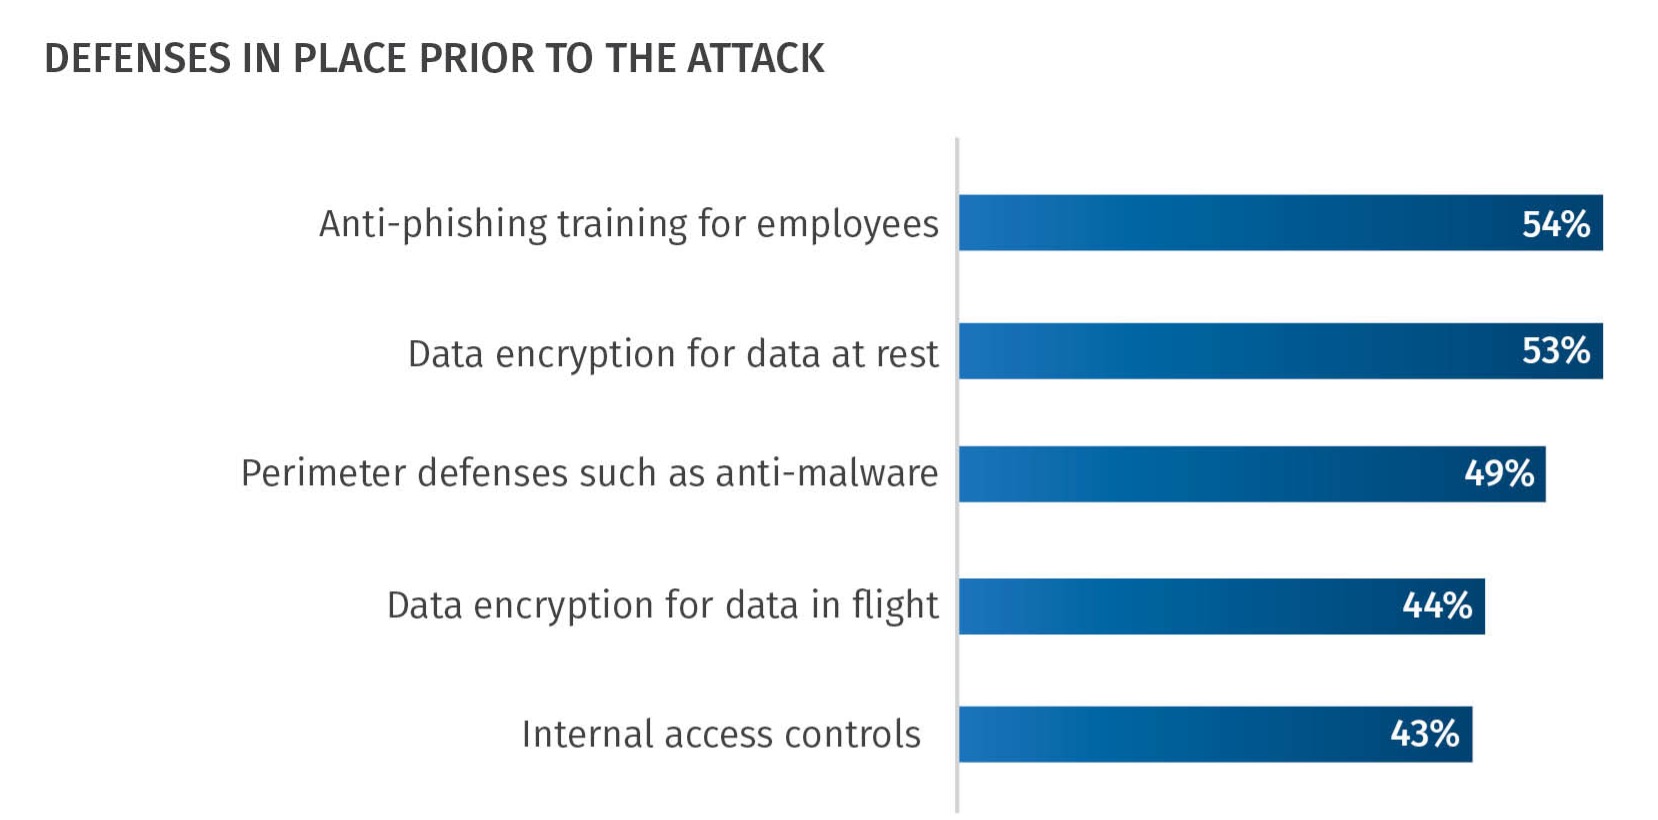 Ransomware Victim Survey Report - Defenses in Place Prior to Attack